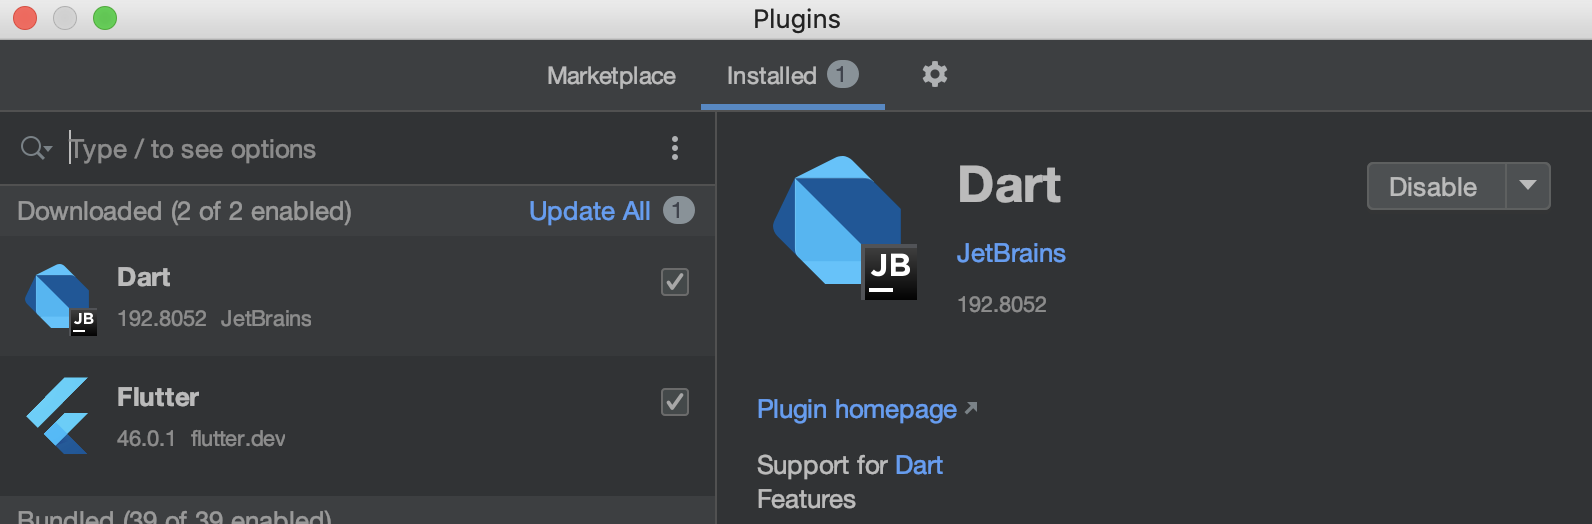 Android Studio Plugins.png